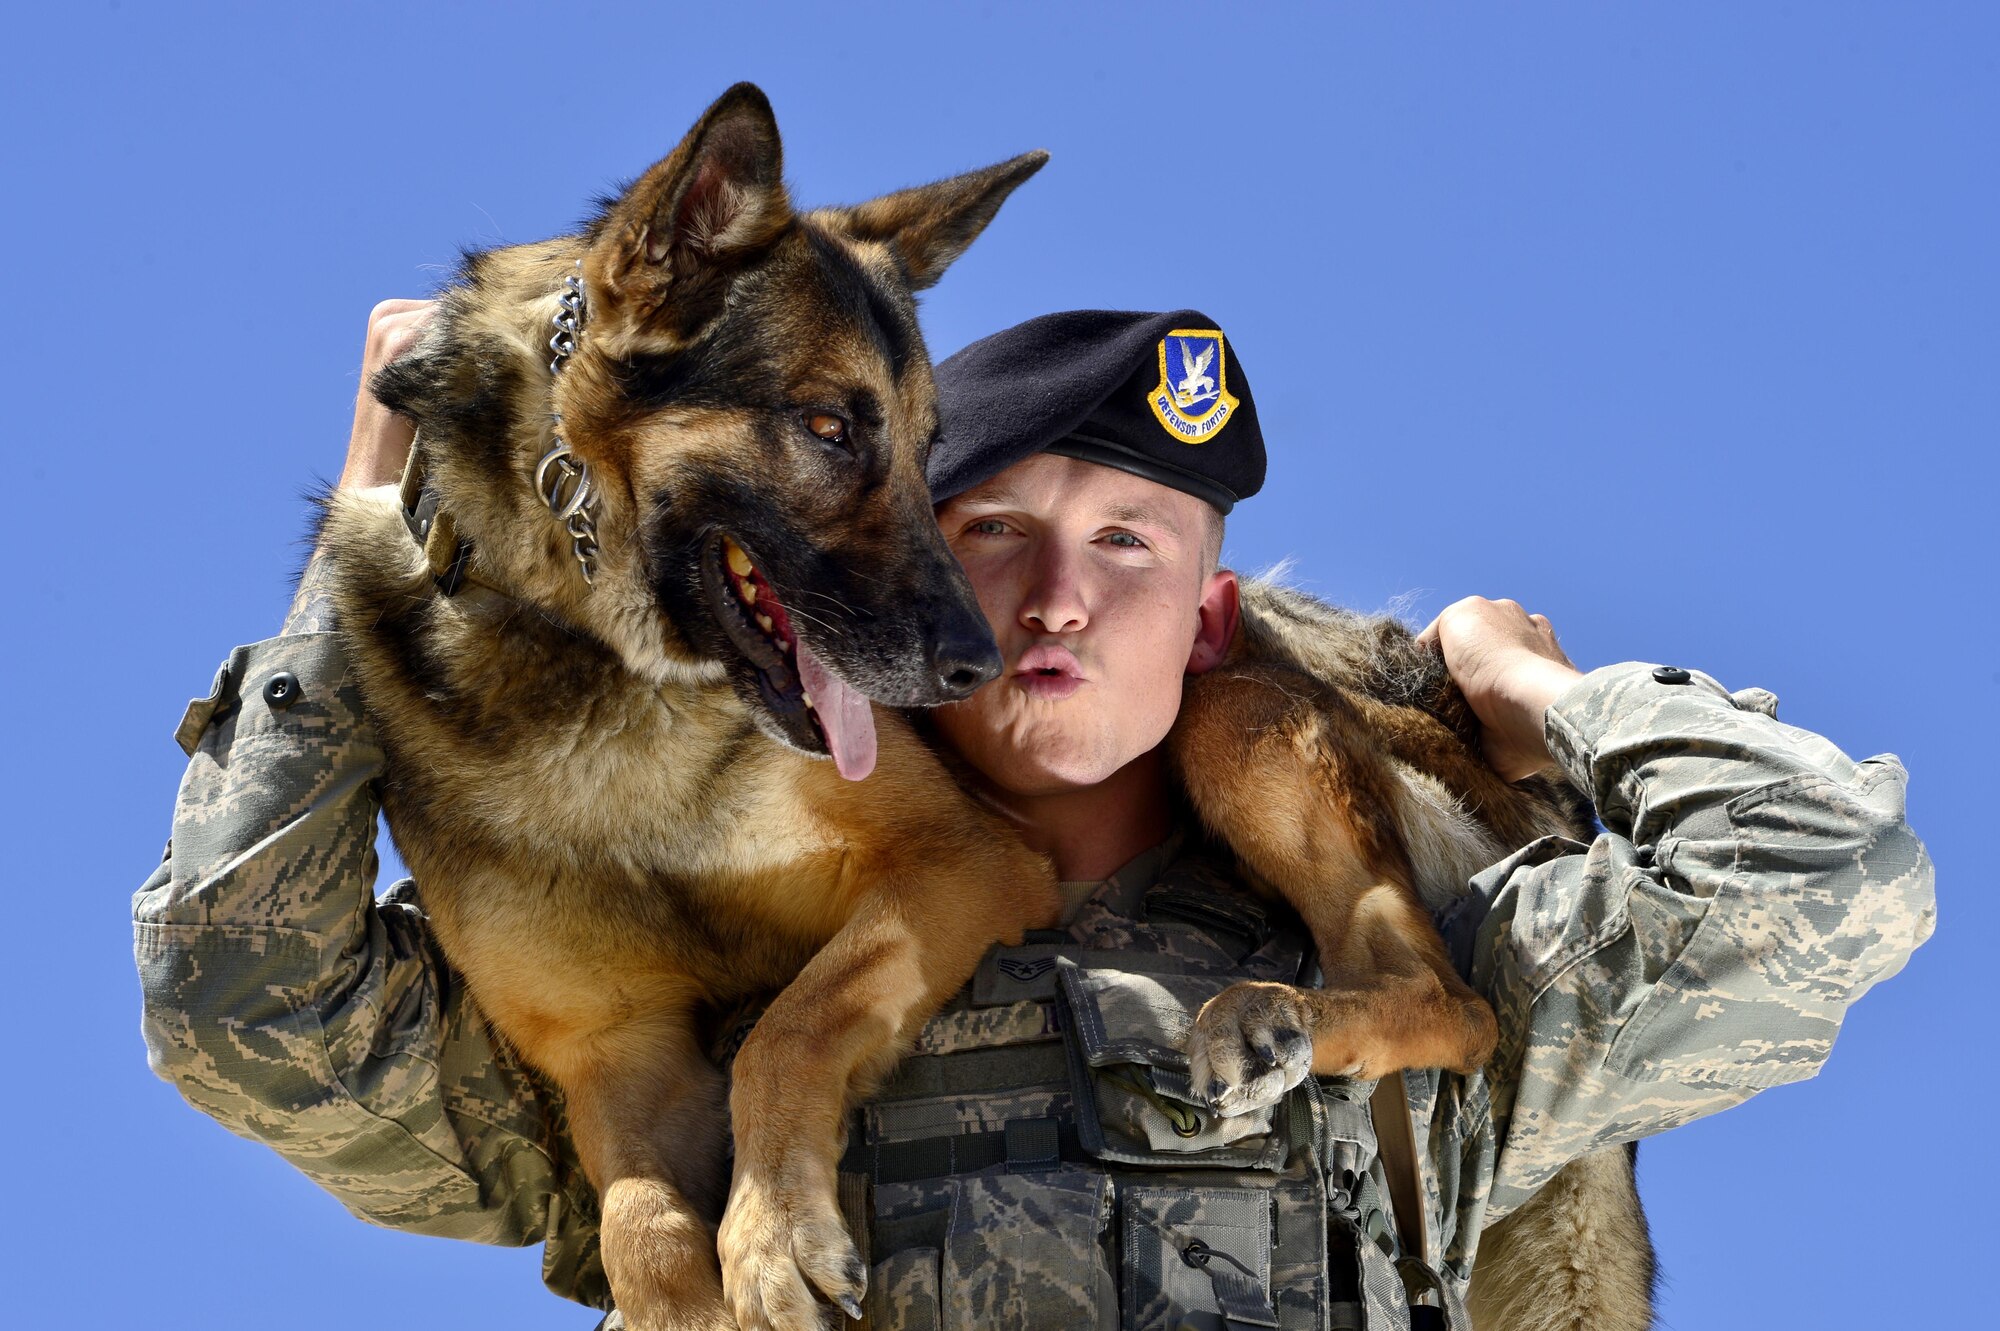 Staff Sgt. John, 799th Security Forces Squadron military working dog handler, poses for a photo with MWD Toby May 10, 2016, at Creech Air Force Base, Nevada. For National Police Week, security forces defenders came together for a MWD demonstration and life of a warrior fitness challenge, and a retreat ceremony to honor the sacrifices of civilian and military law enforcement personnel. (U.S. Air Force photo by Senior Airman Christian Clausen/Released)